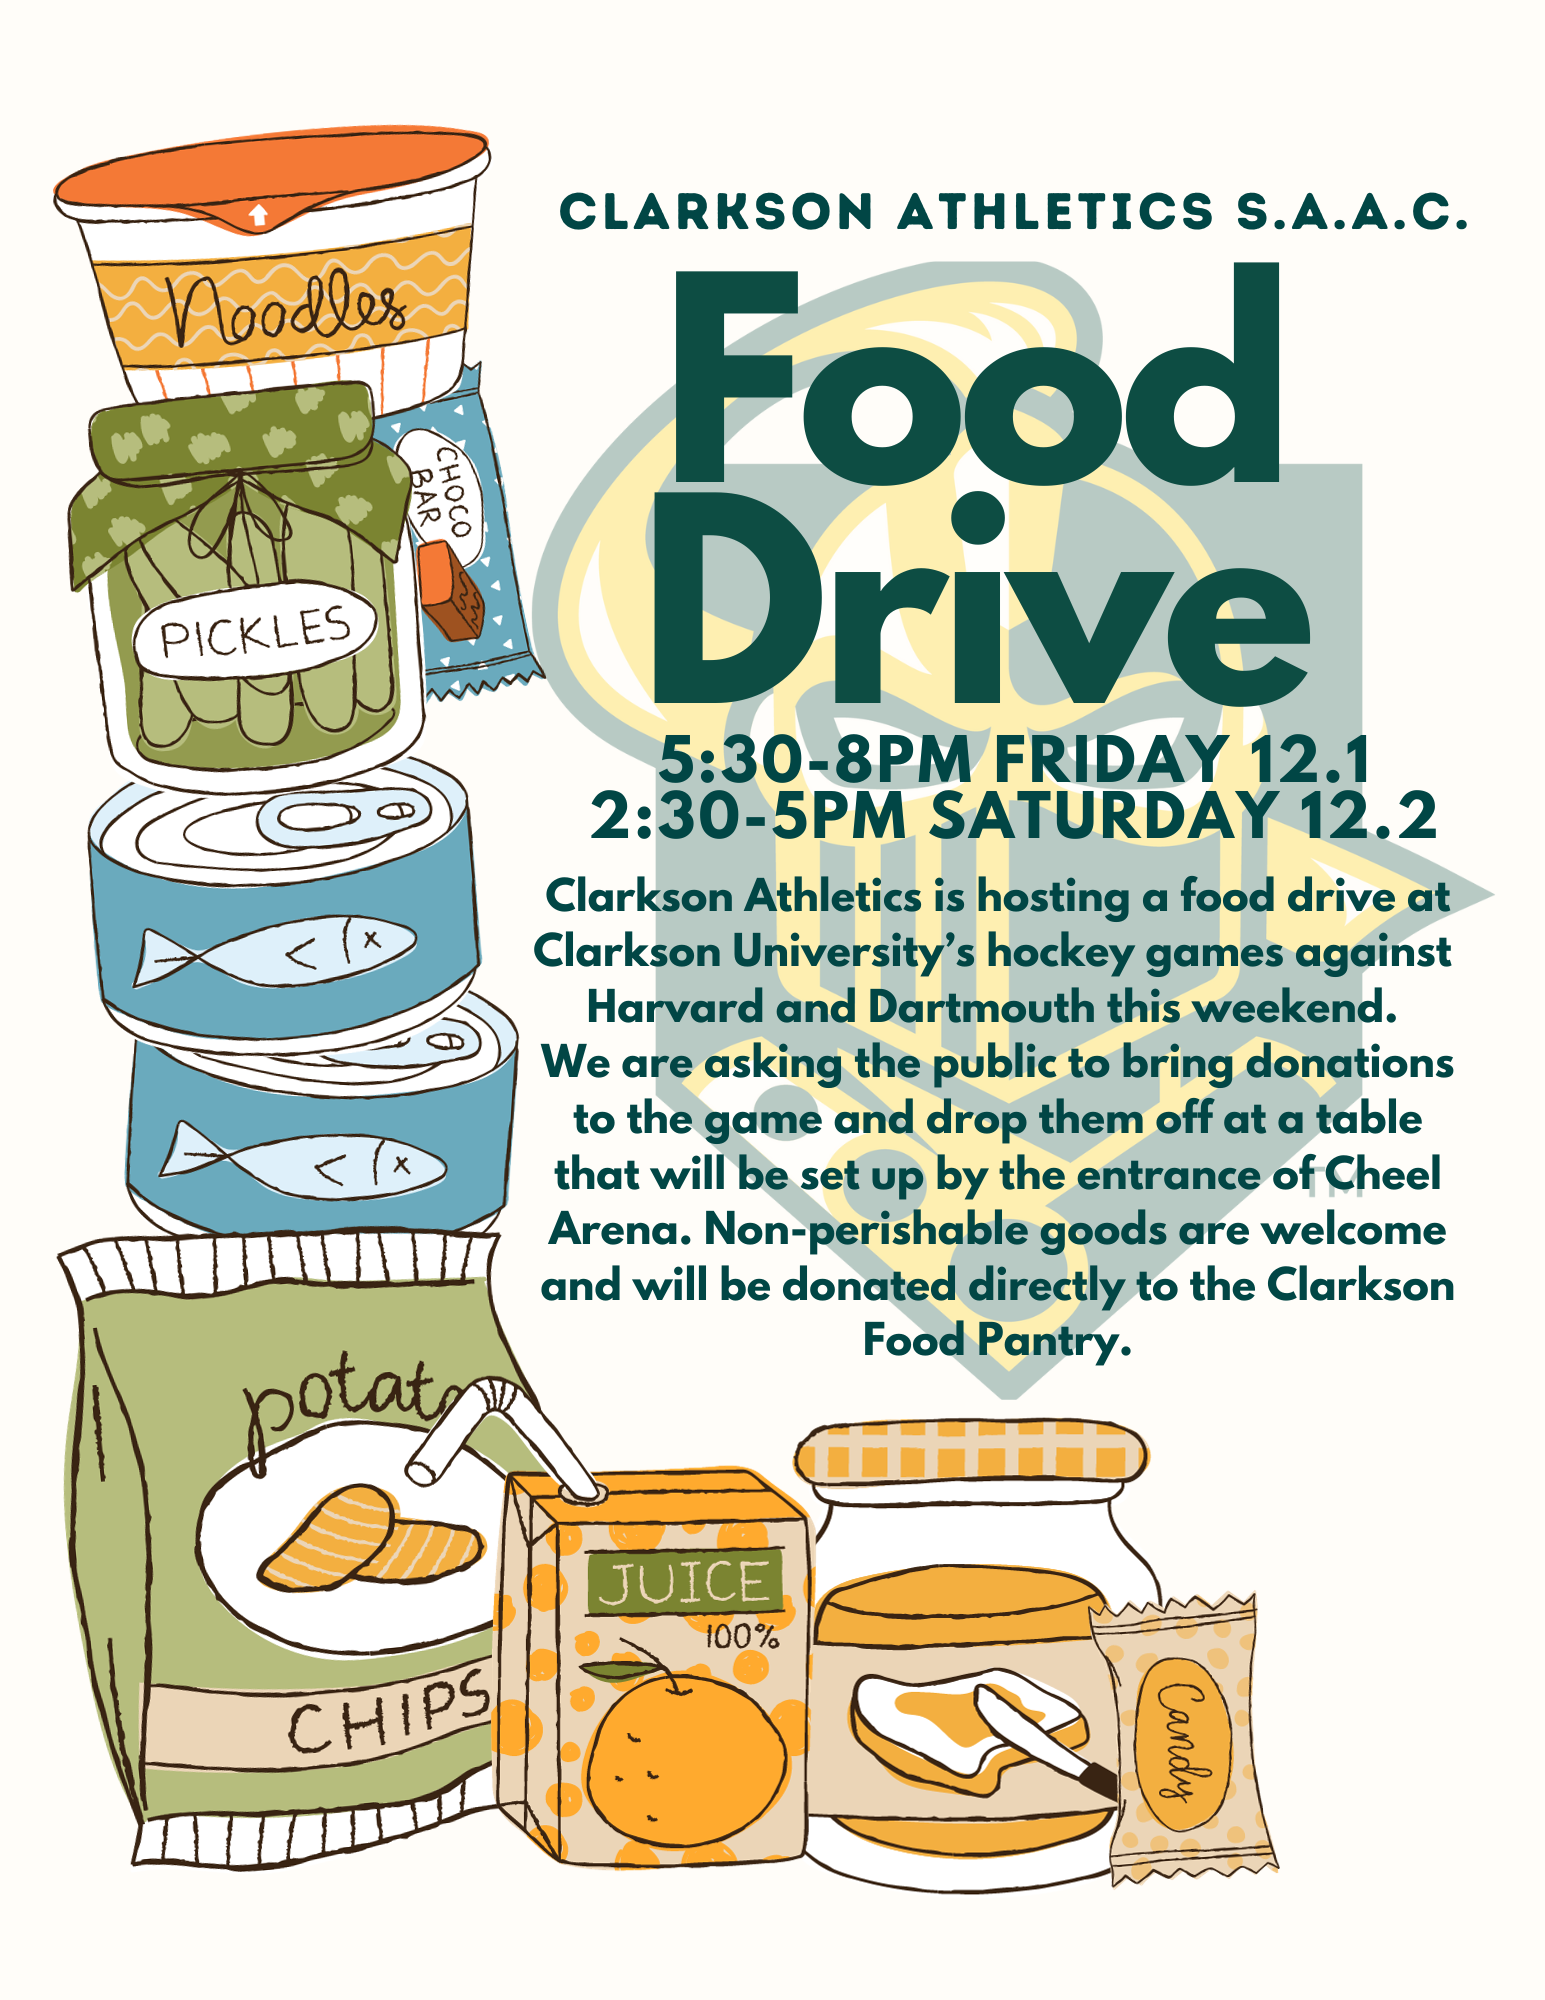 Student Athlete Advisory Committee Hosting Food Drive at Hockey Games this Weekend (12/1-12/2)